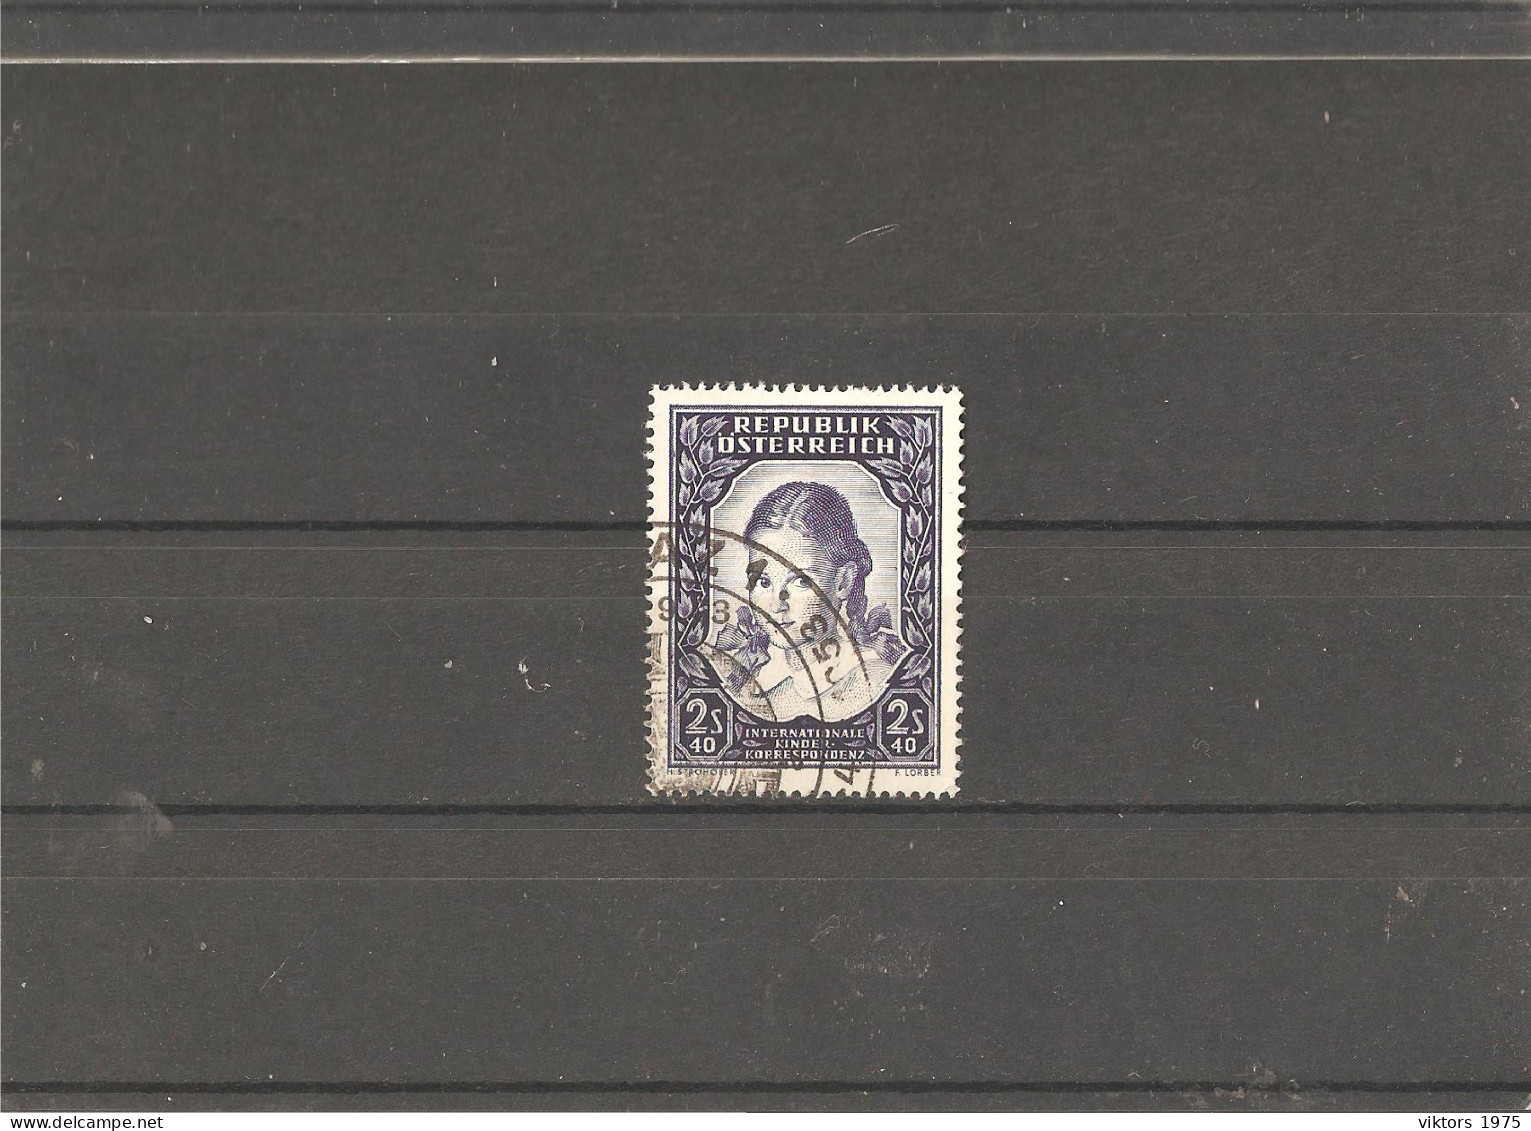 Used Stamp Nr.976 In MICHEL Catalog - Used Stamps